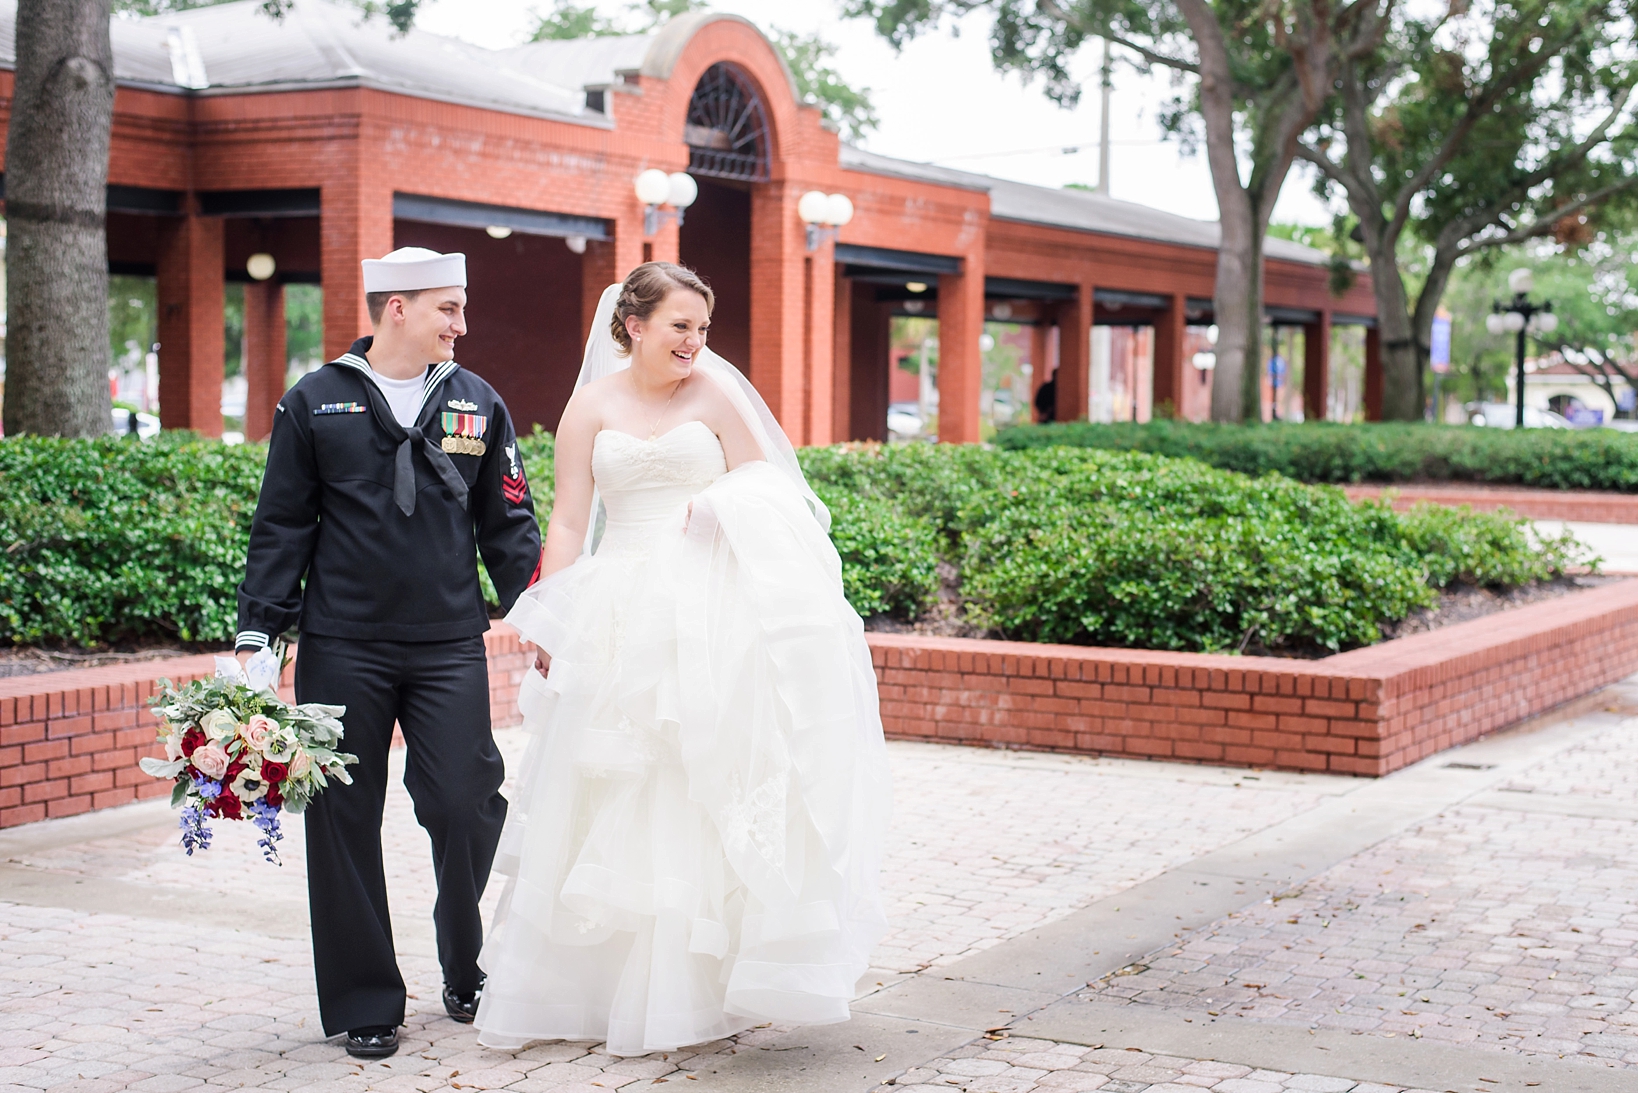 Bride and Groom share a genuine candid moment on their wedding day in Ybor City, Tampa